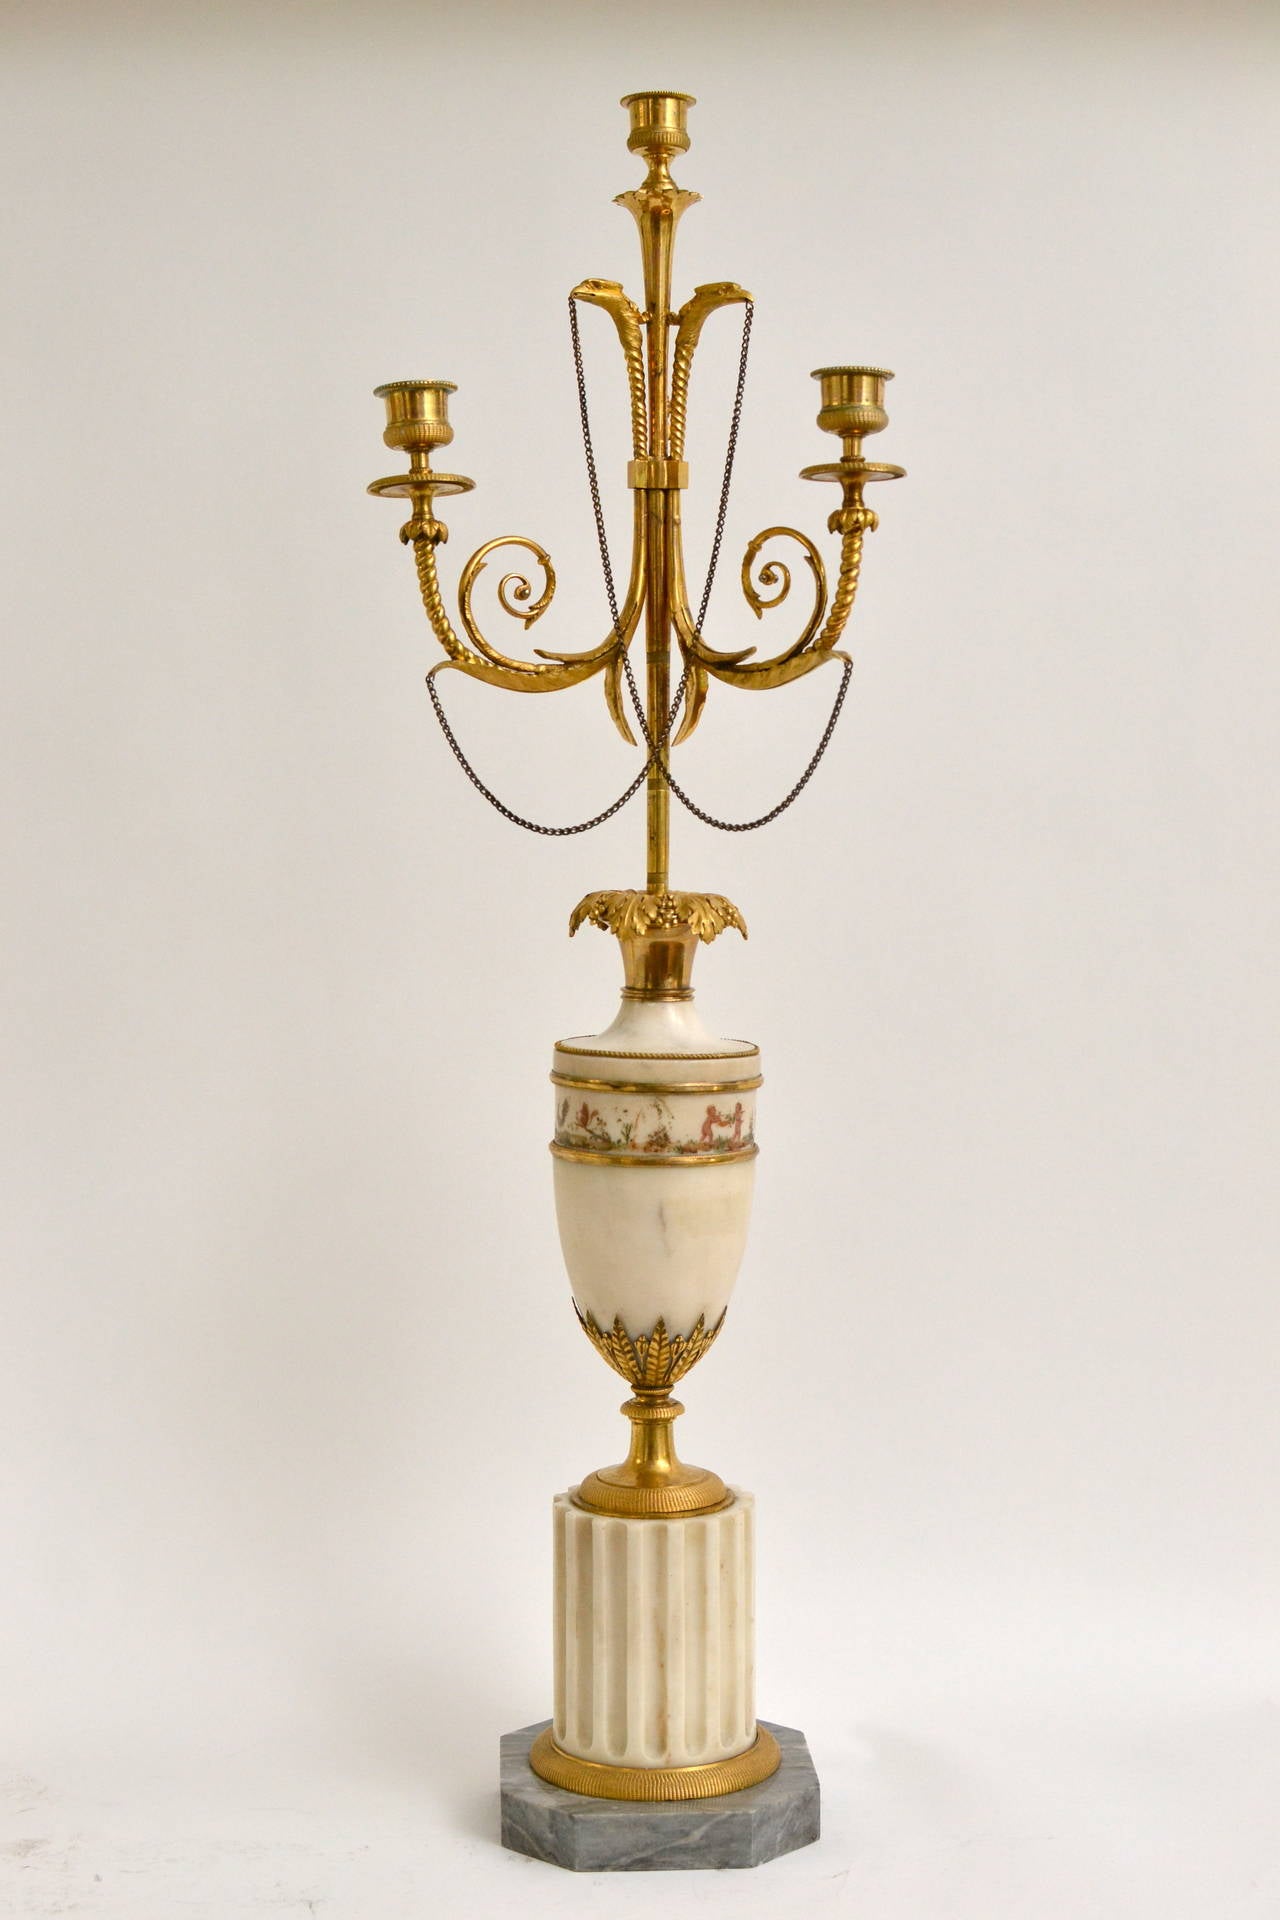 A pair of Directoire gilt bronze and marble candelabra, possibly German from, circa 1800.